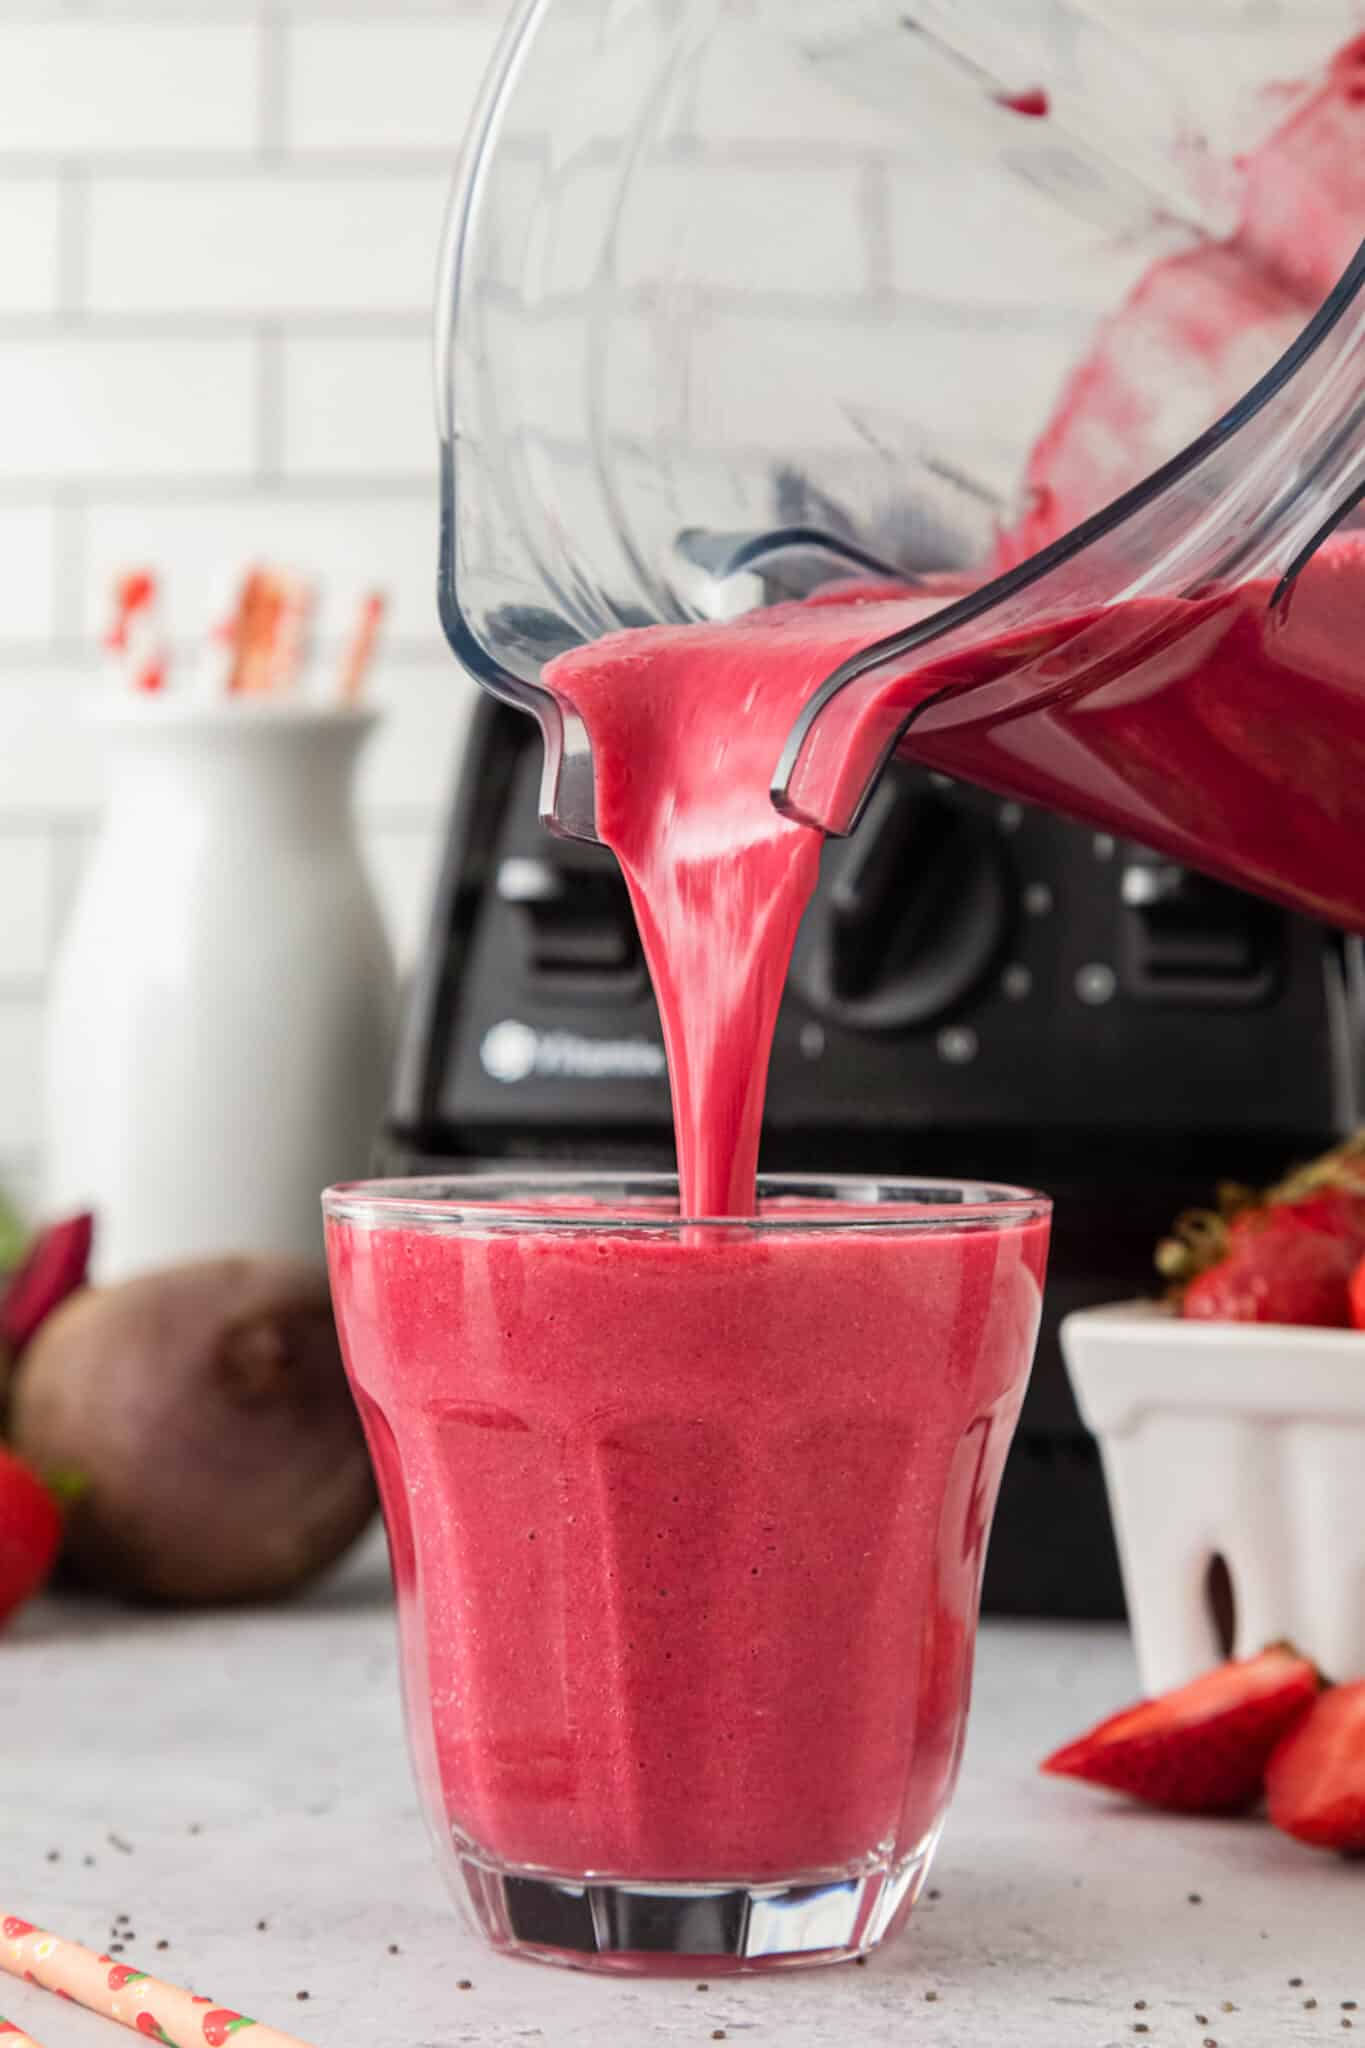 A strawberry smoothie being poured from a blender jar into a glass.